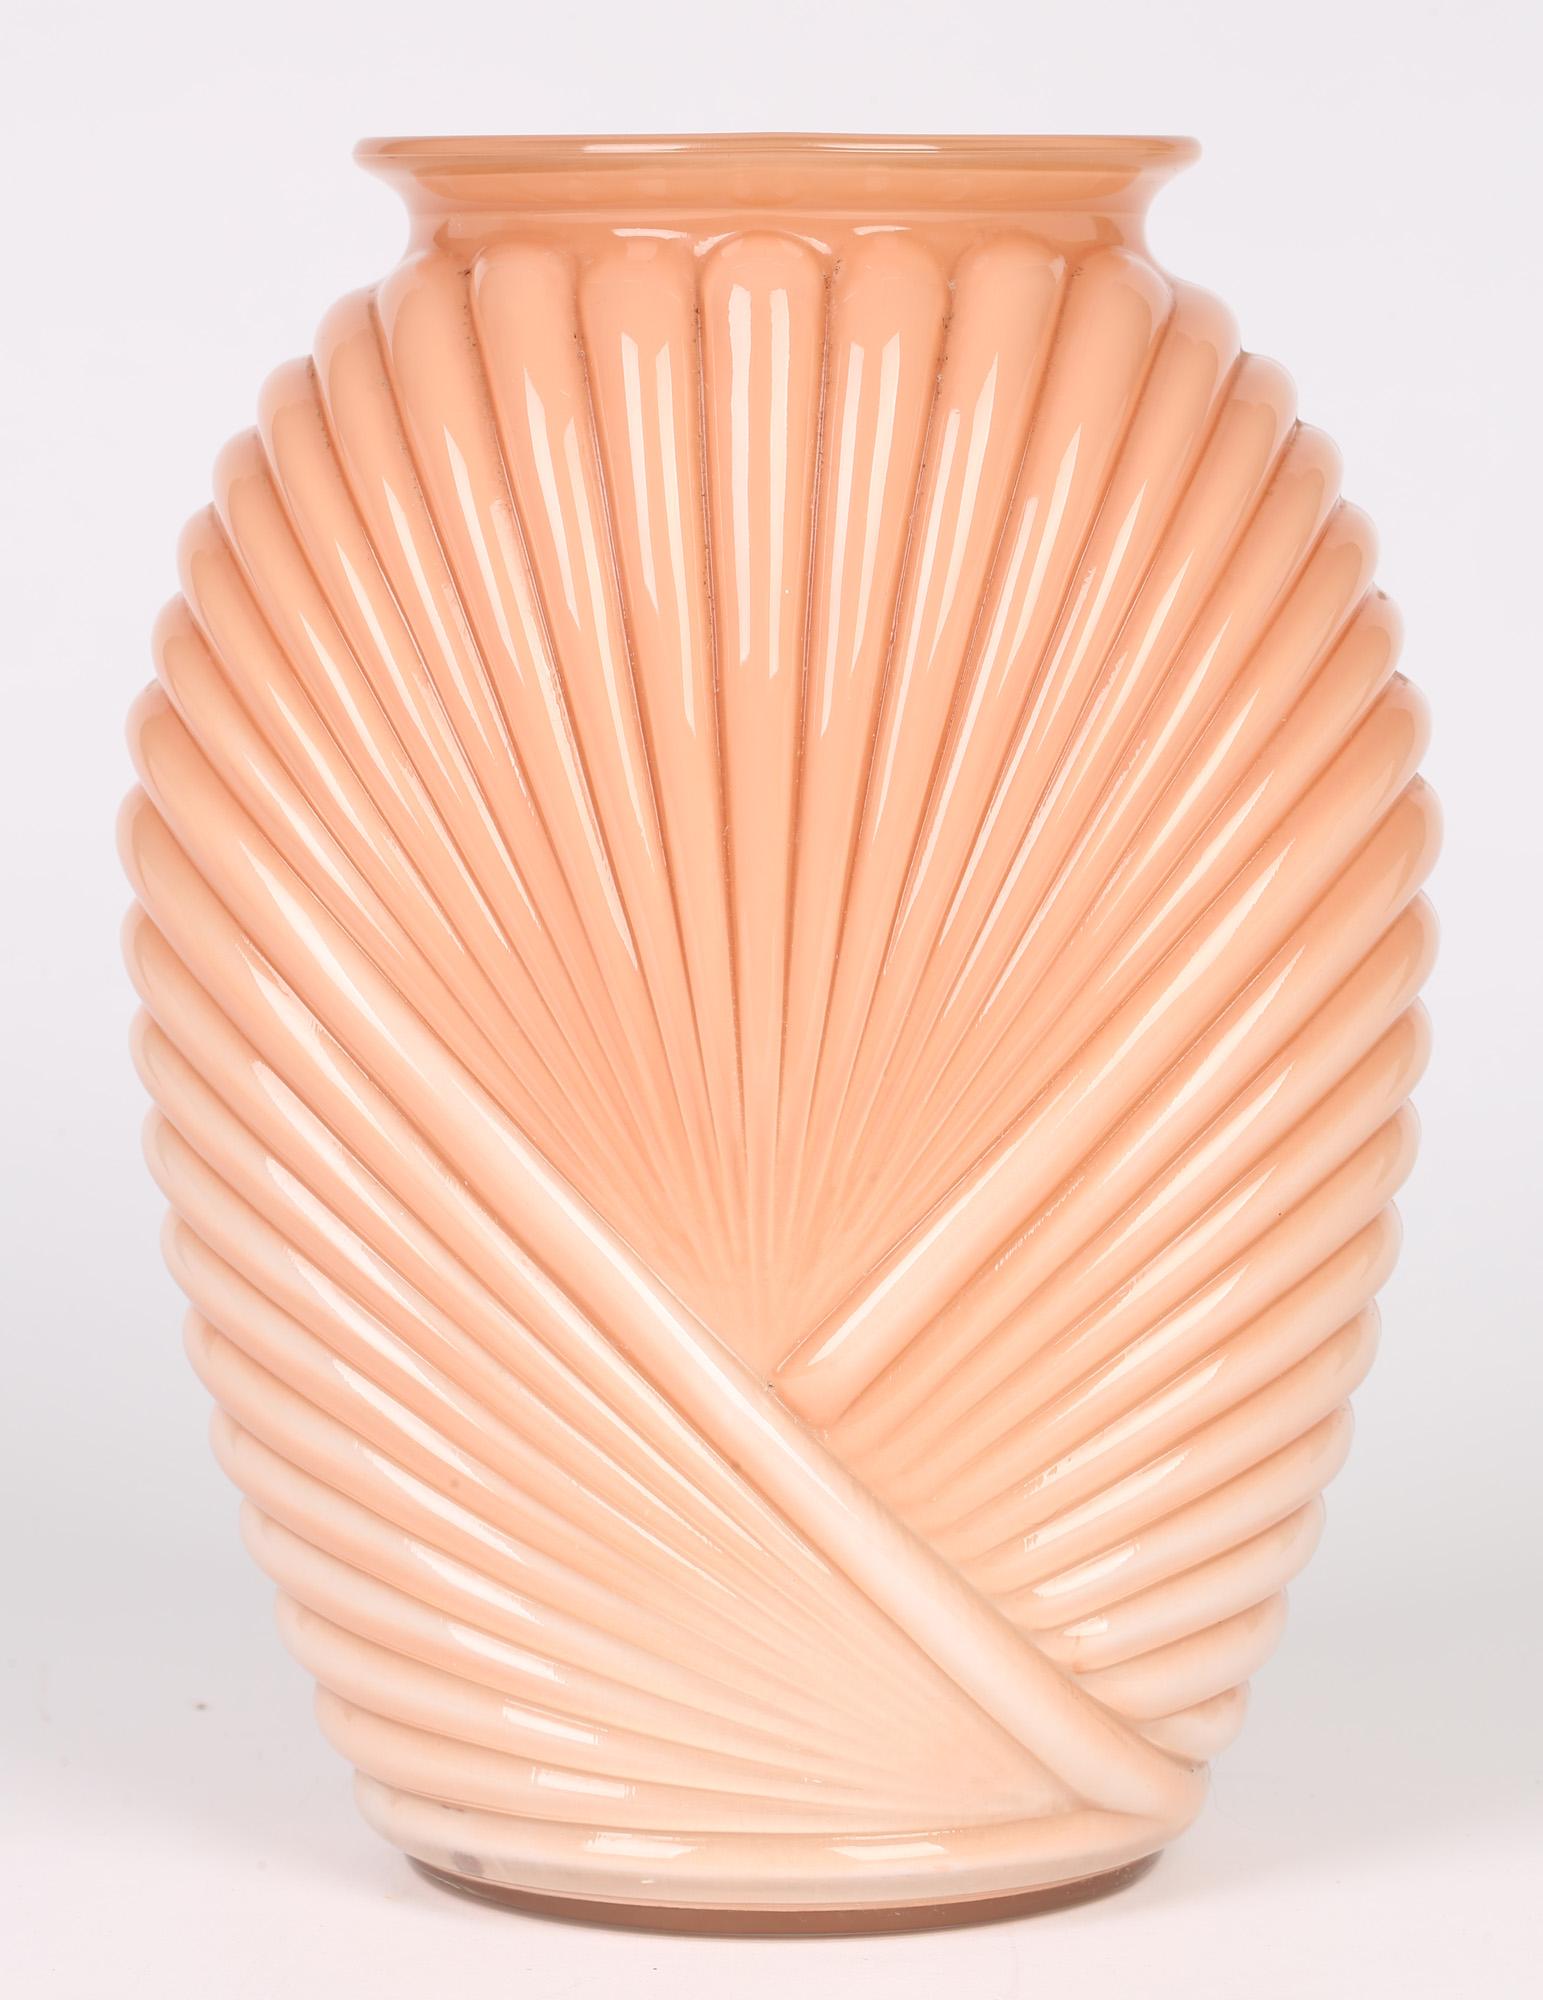 American Anchor Hocking Art Deco Style Salmon Pink Molded Fan Pattern Glass Vase For Sale